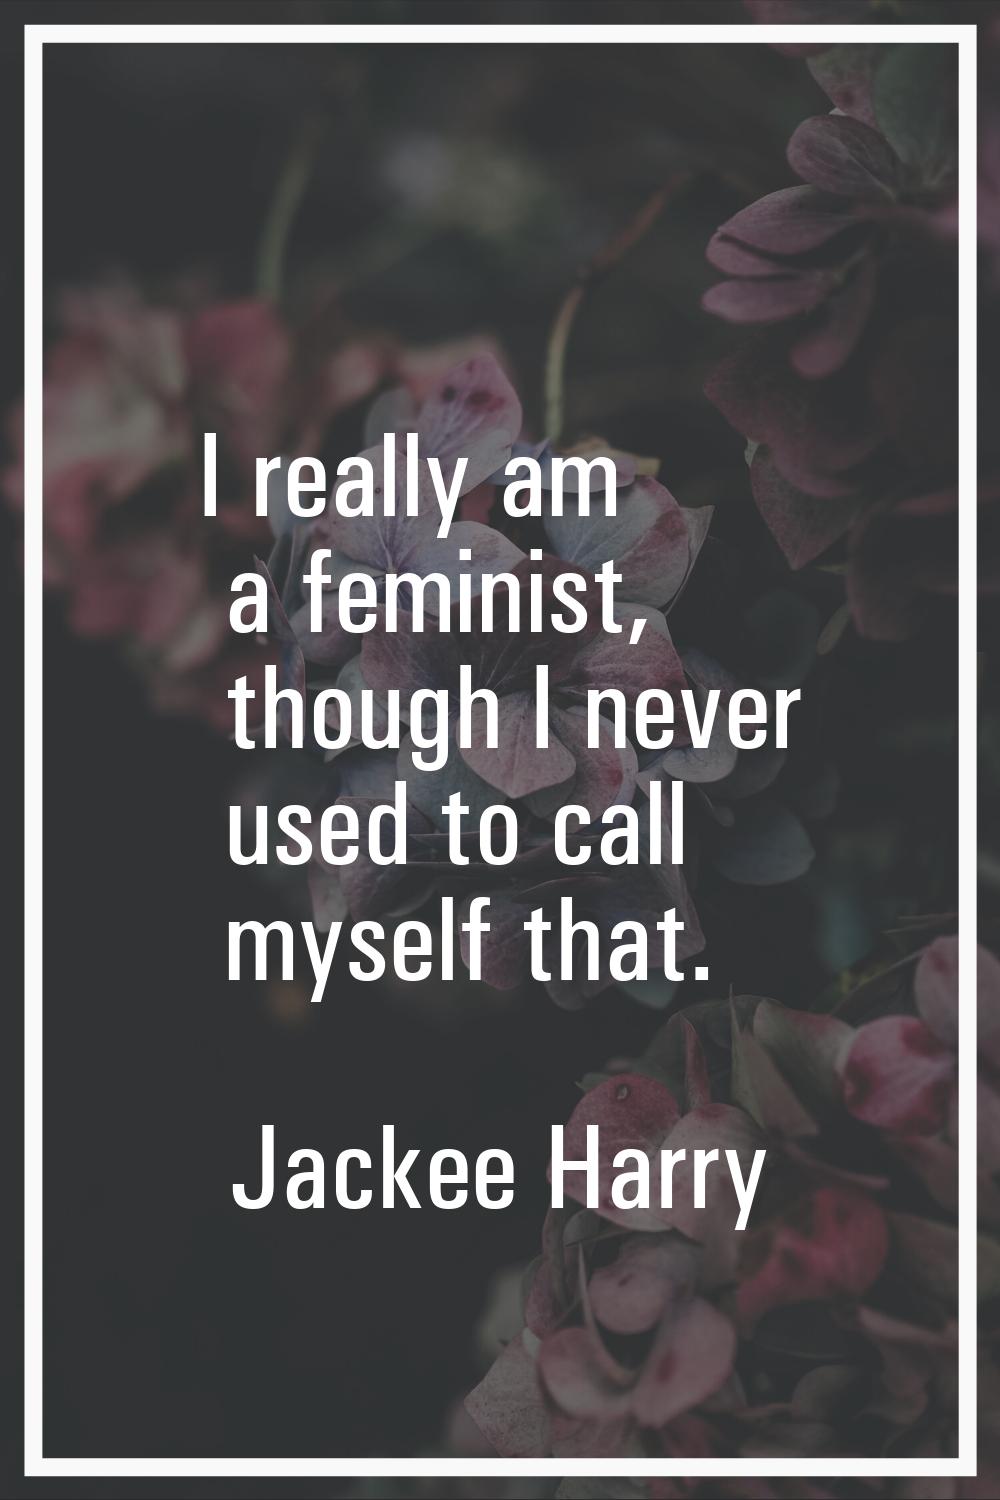 I really am a feminist, though I never used to call myself that.